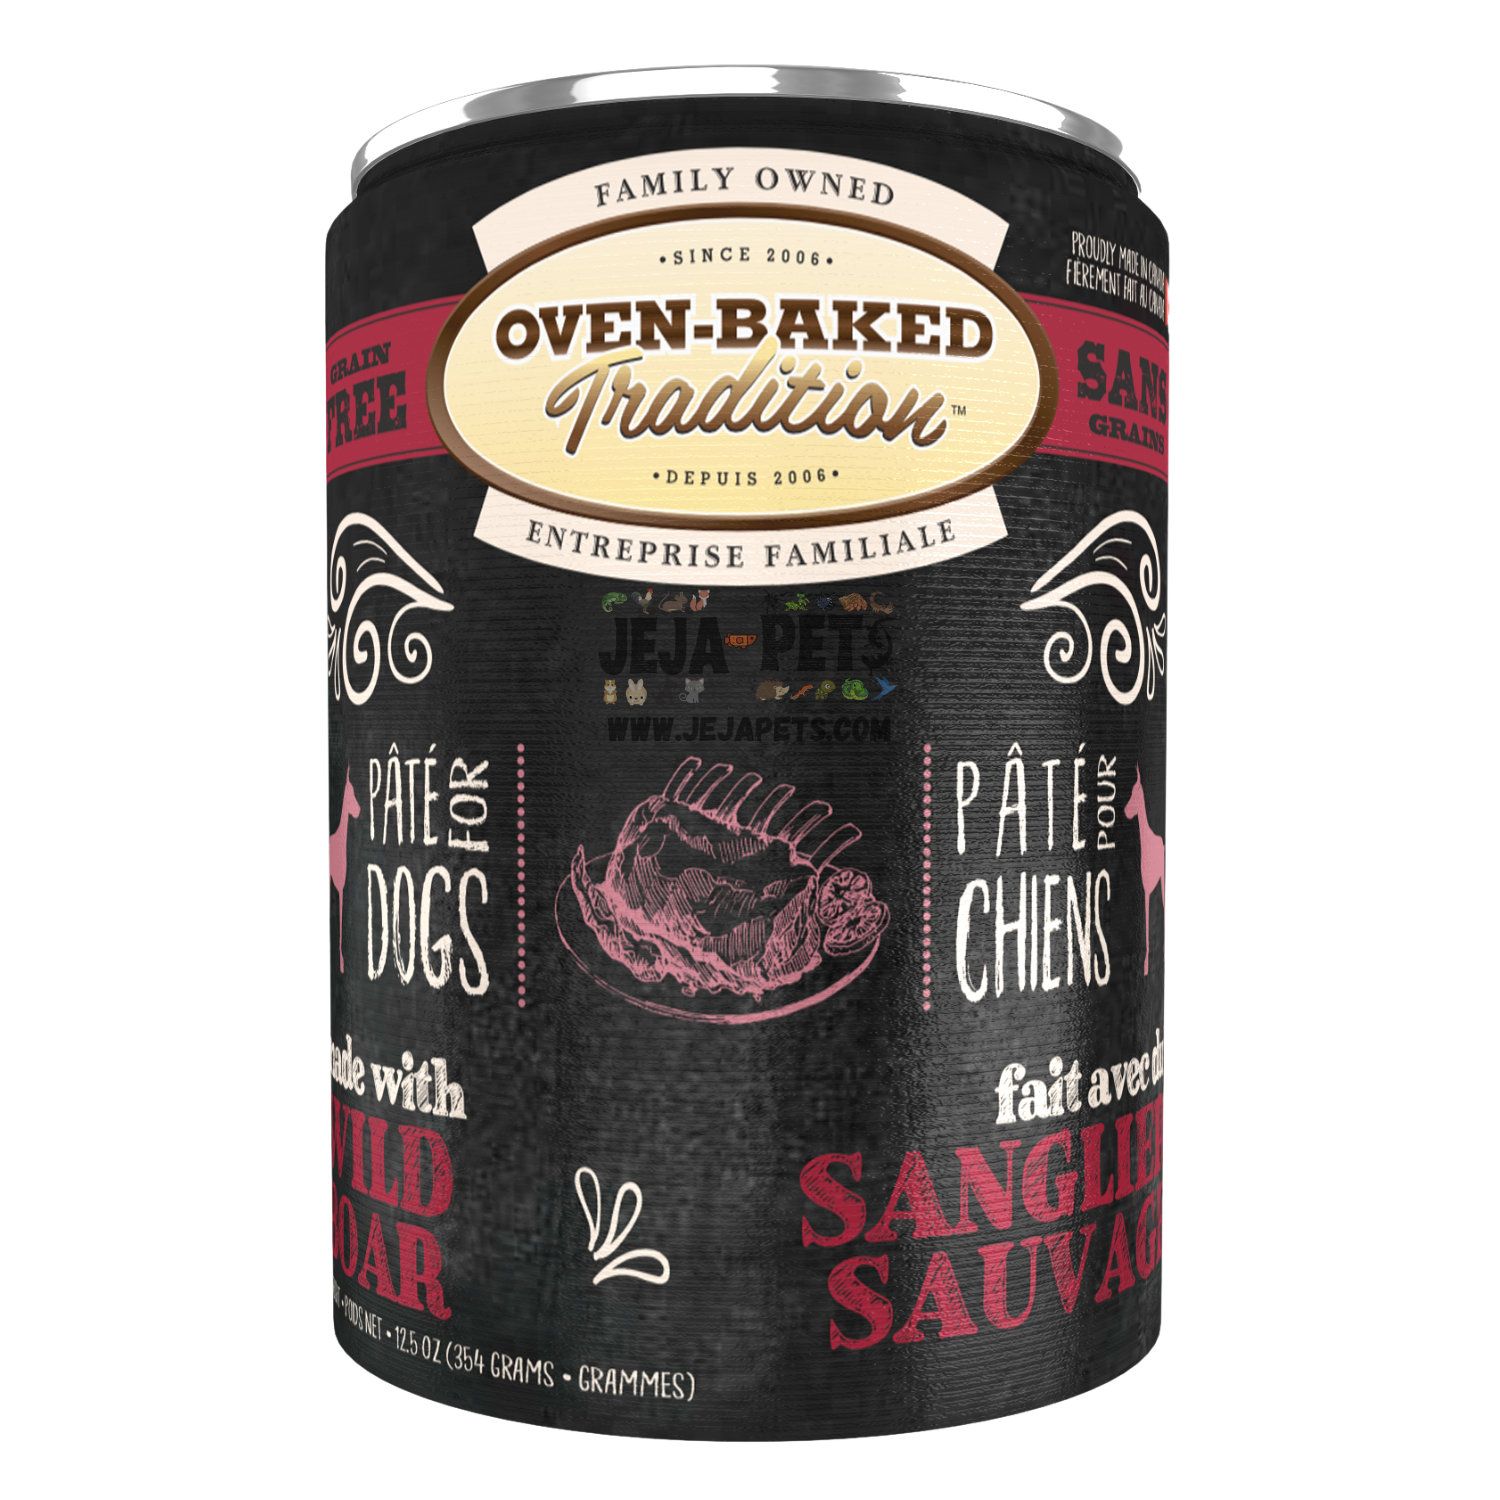 Oven-Baked Tradition (Boar) PÂTÉ Canned Food for Dogs - 354g